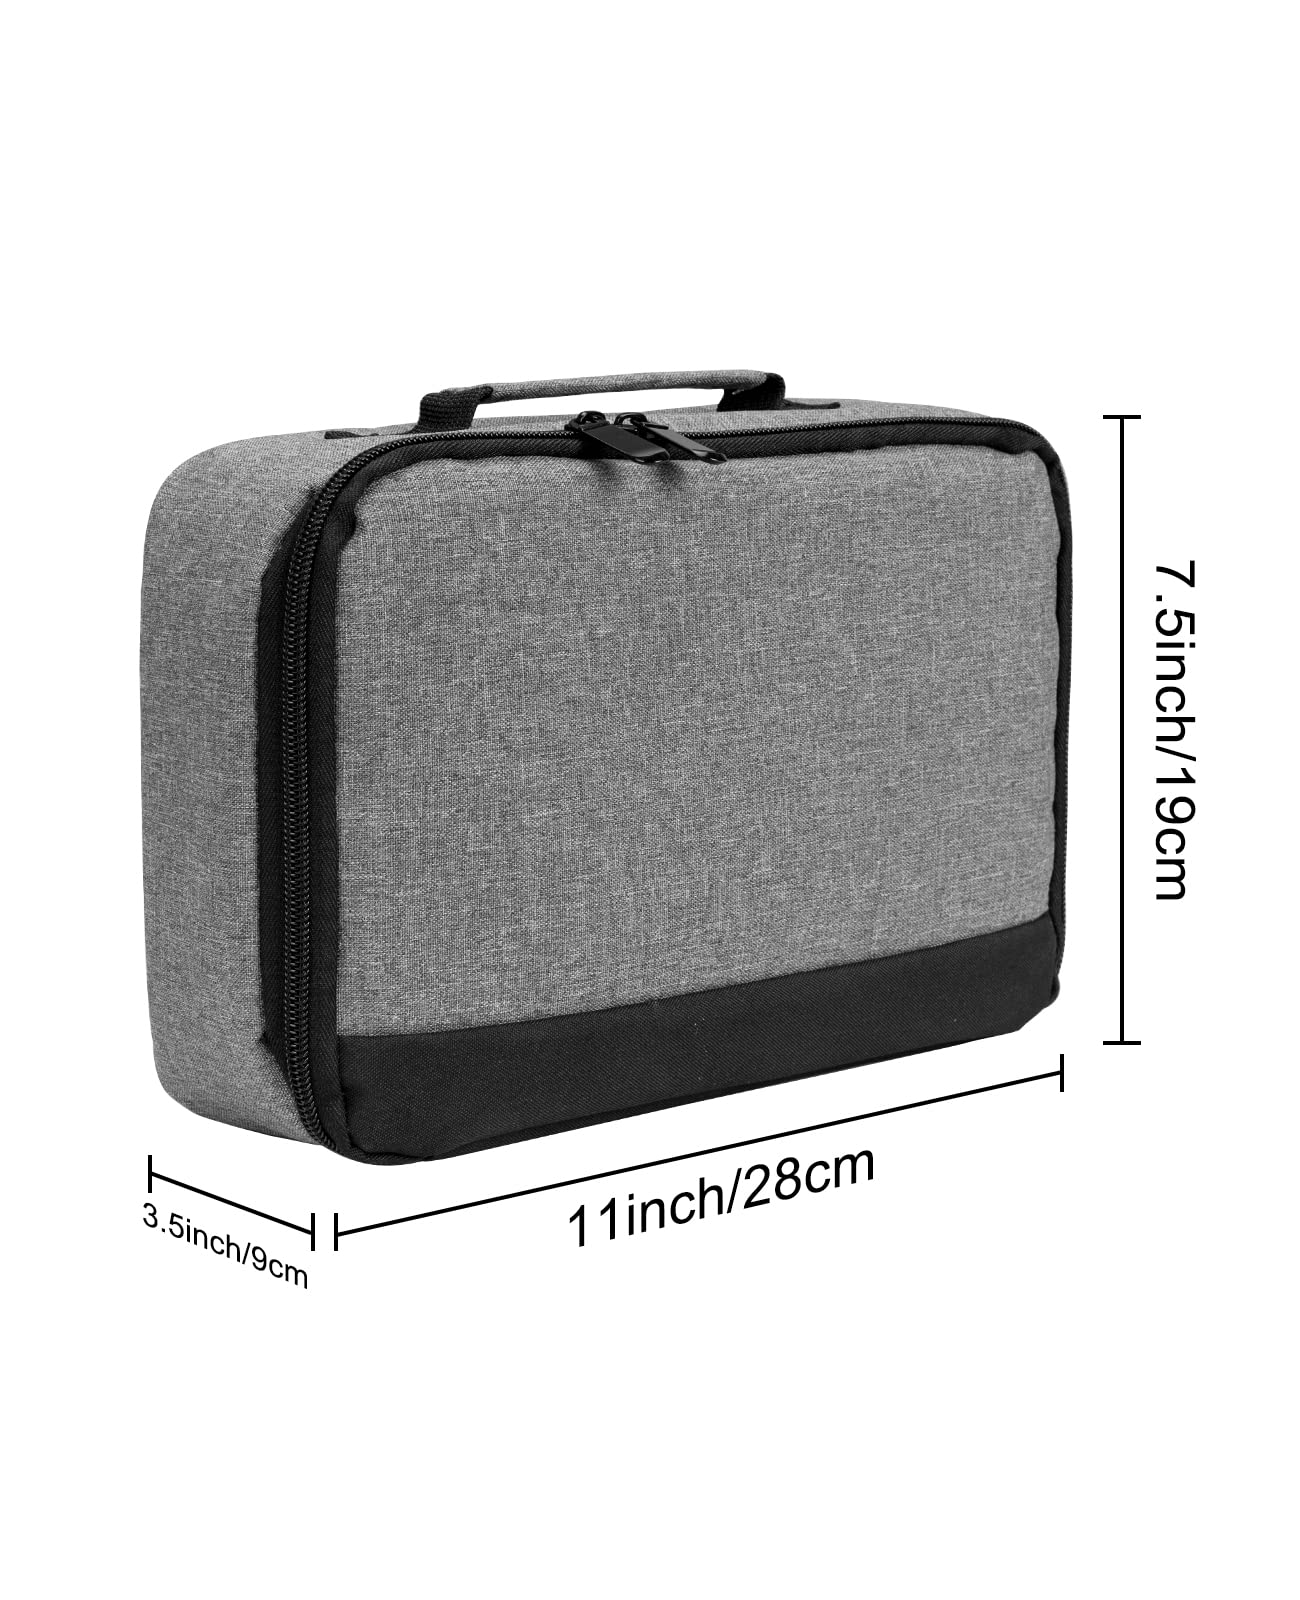 ELEPHAS Projector Case, Projector Carrying Bag with Accessories Pockets (12 x 7.5 x 4 Inches), Grey